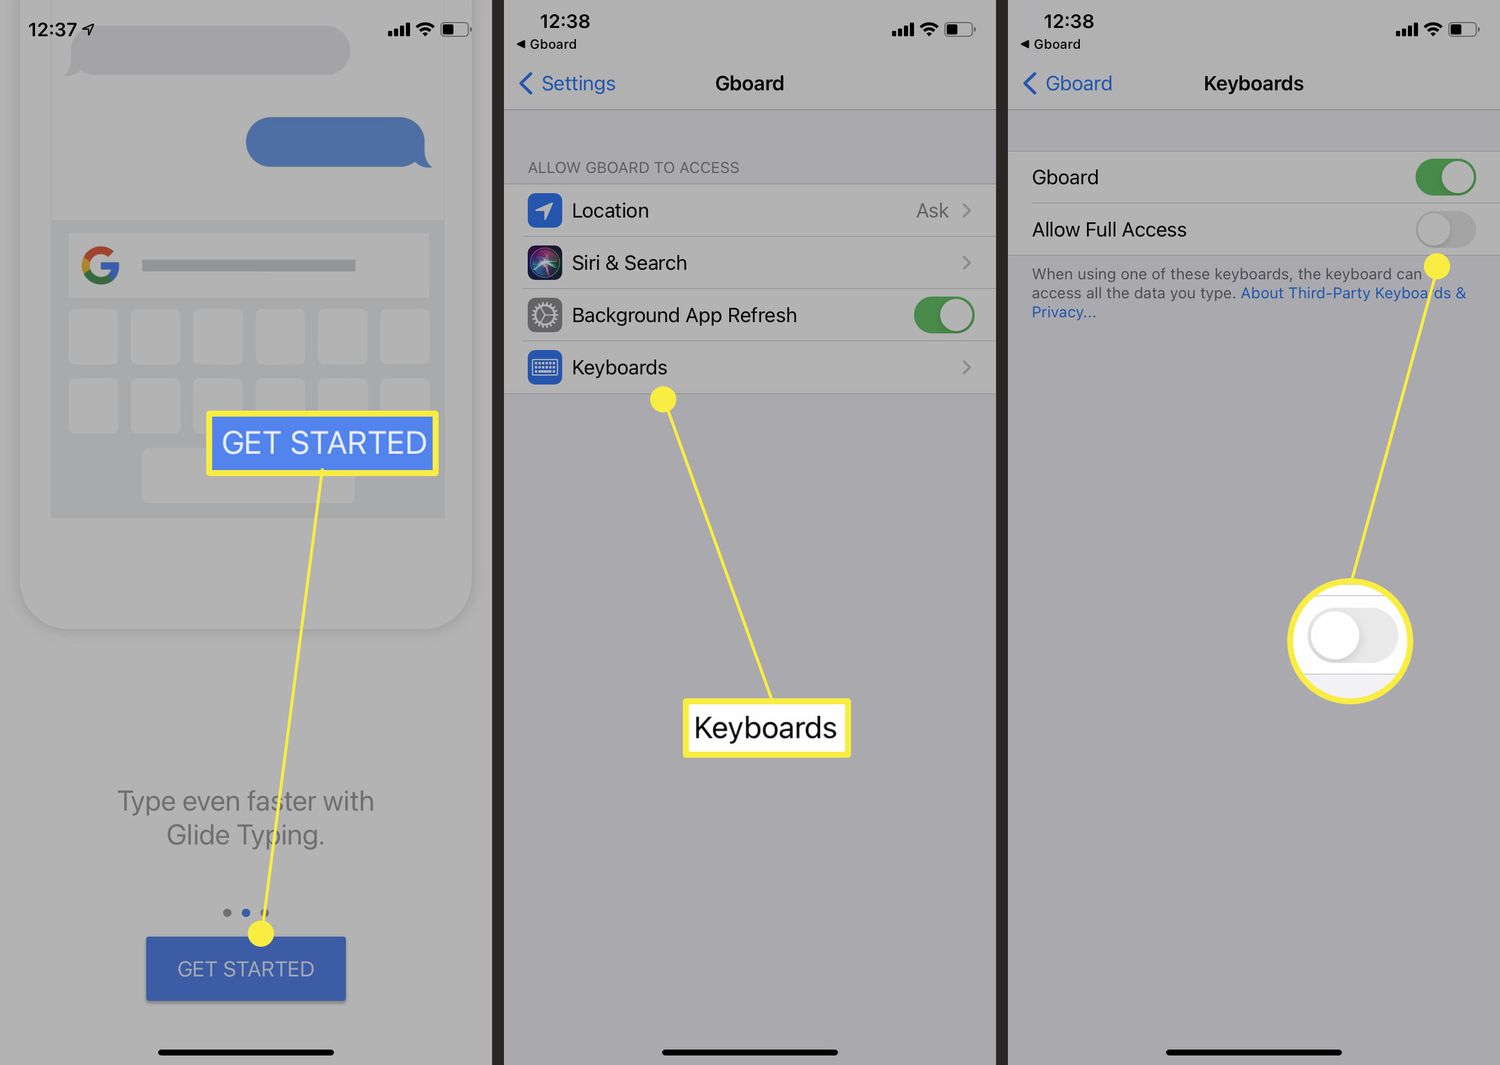 Different Steps To Giving Access Of Keyboard To Google In Iphone